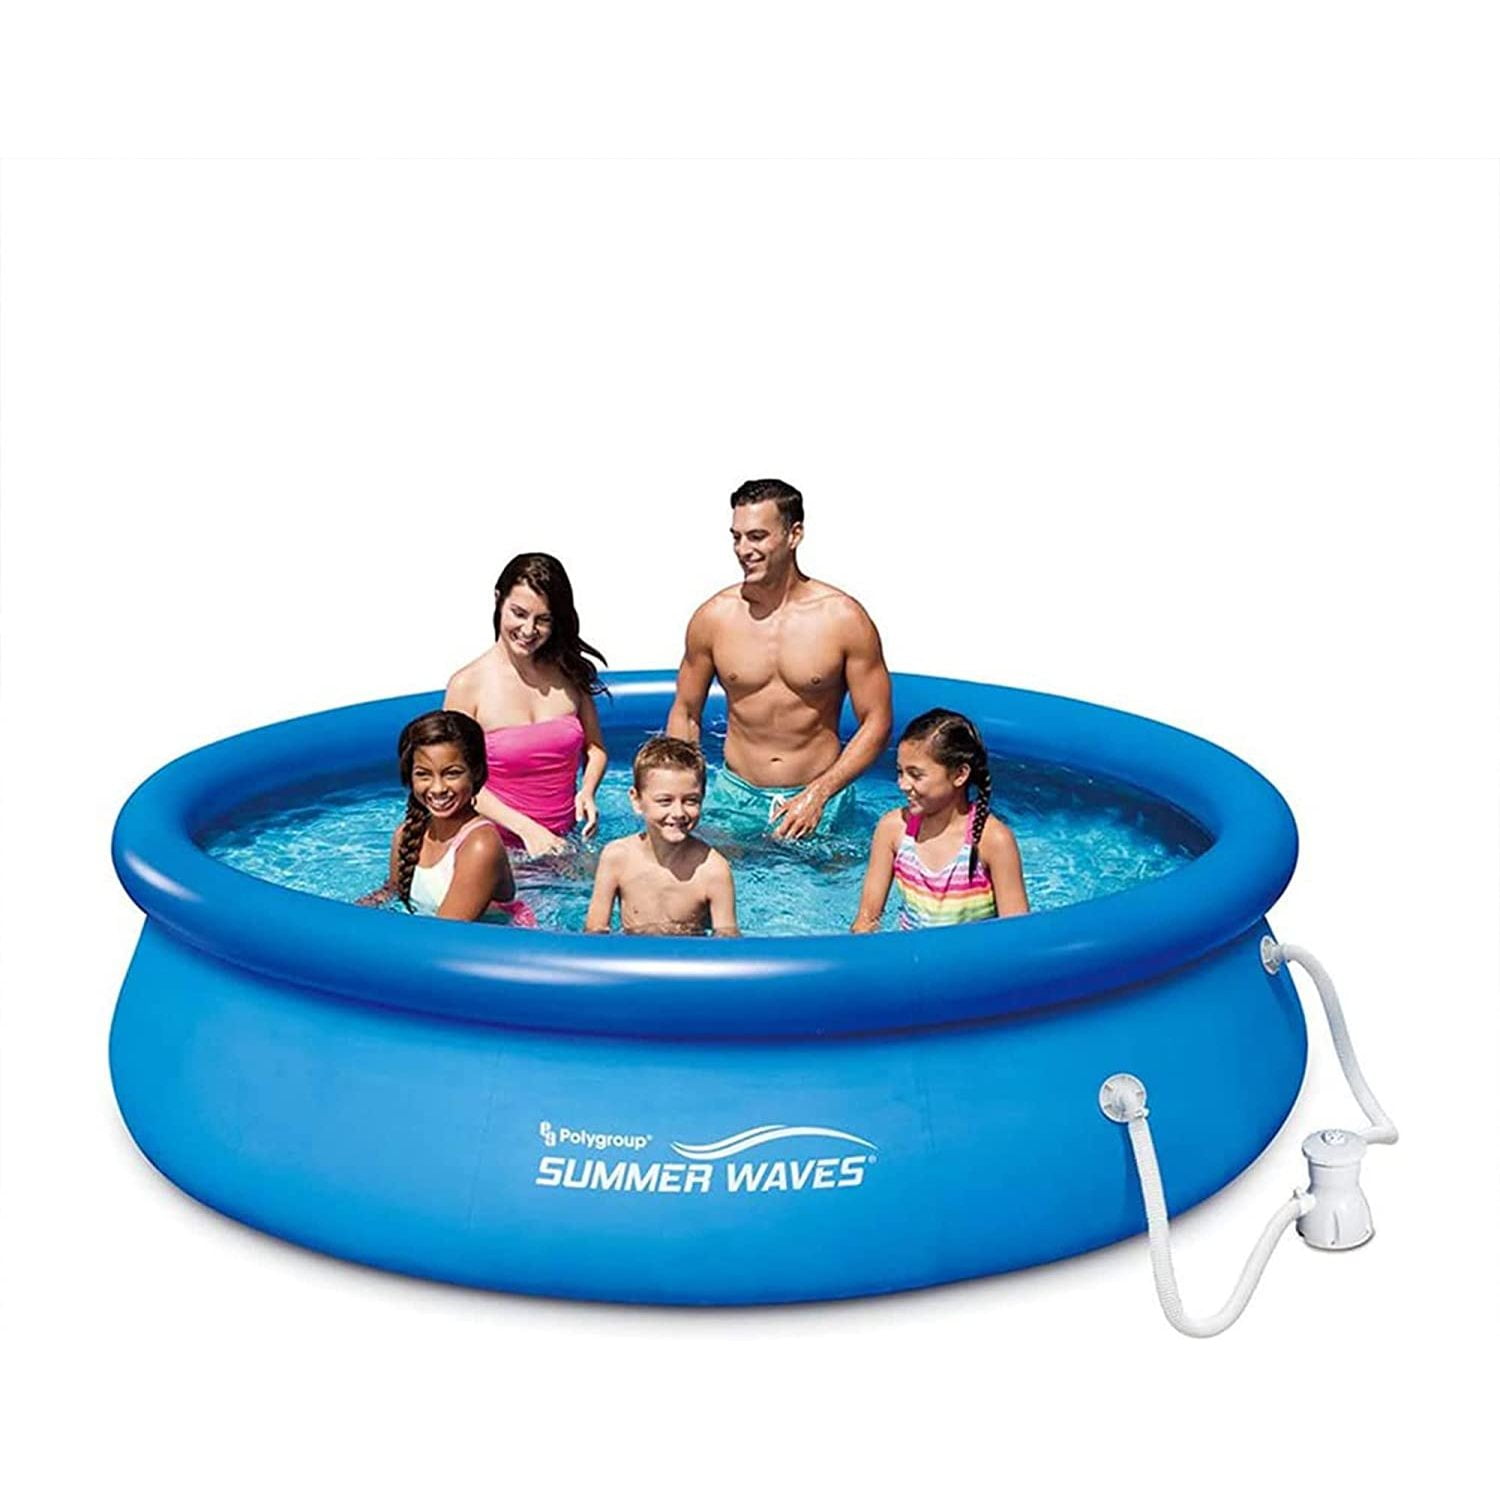 Blue Swimming Summer P1001030A Filter GFCI with Waves Outdoor Inflatable 10ft Set Ground Outdoor RX300 Quick x Pool System, 2.5ft Ring Above Pump